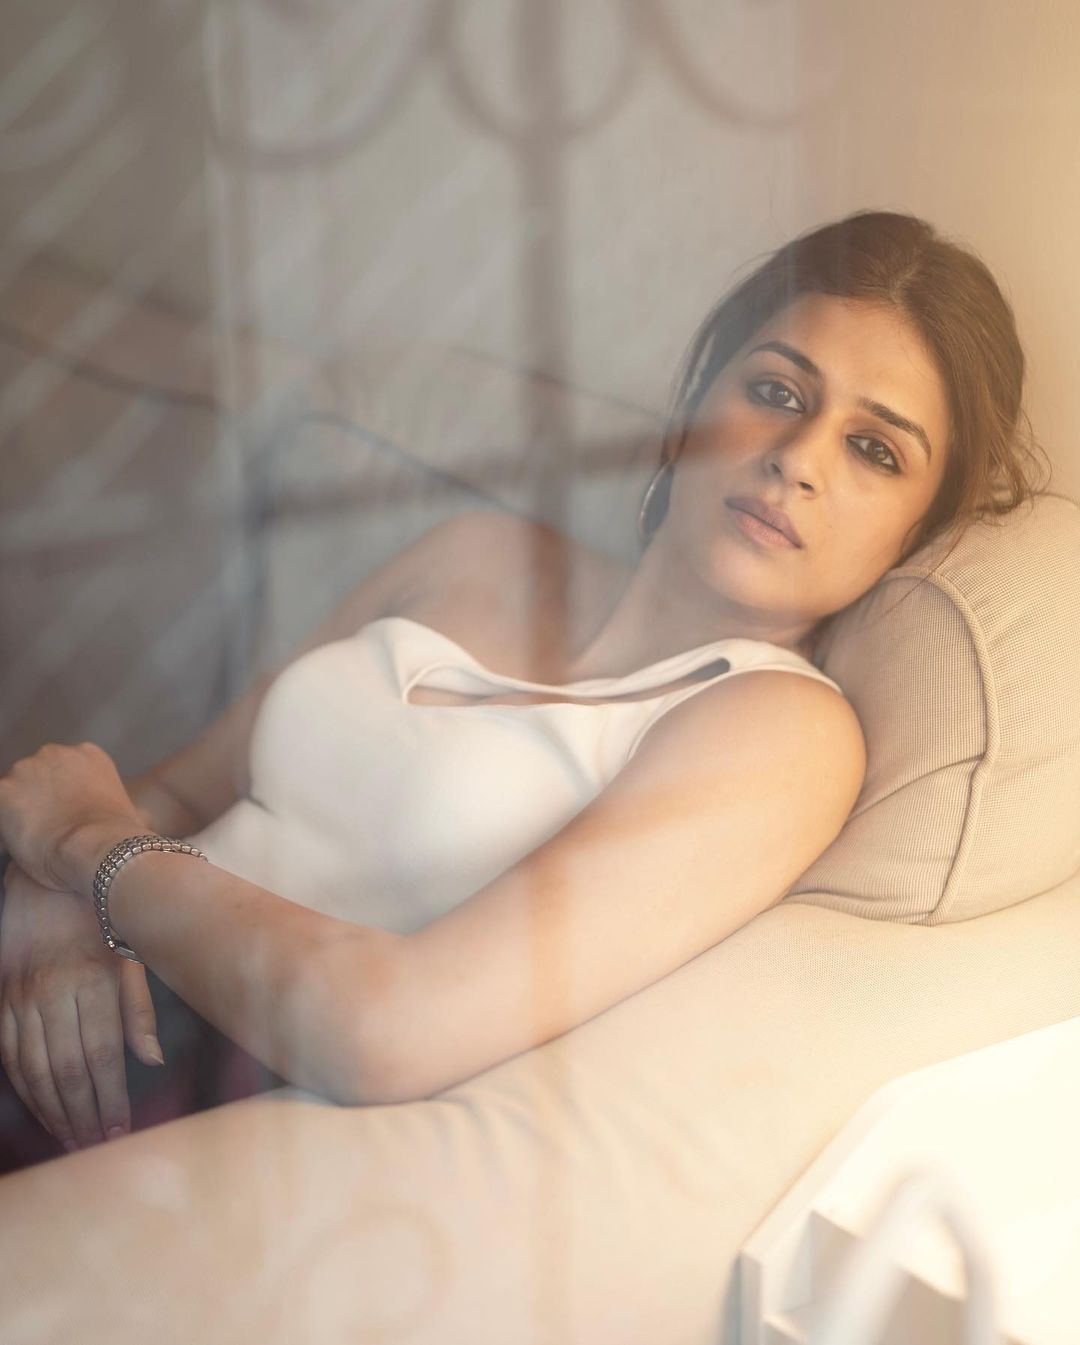 Actress shraddha das impressing viewers with her glamorous photos-Actressshraddha, Shraddha Das Photos,Spicy Hot Pics,Images,High Resolution WallPapers Download